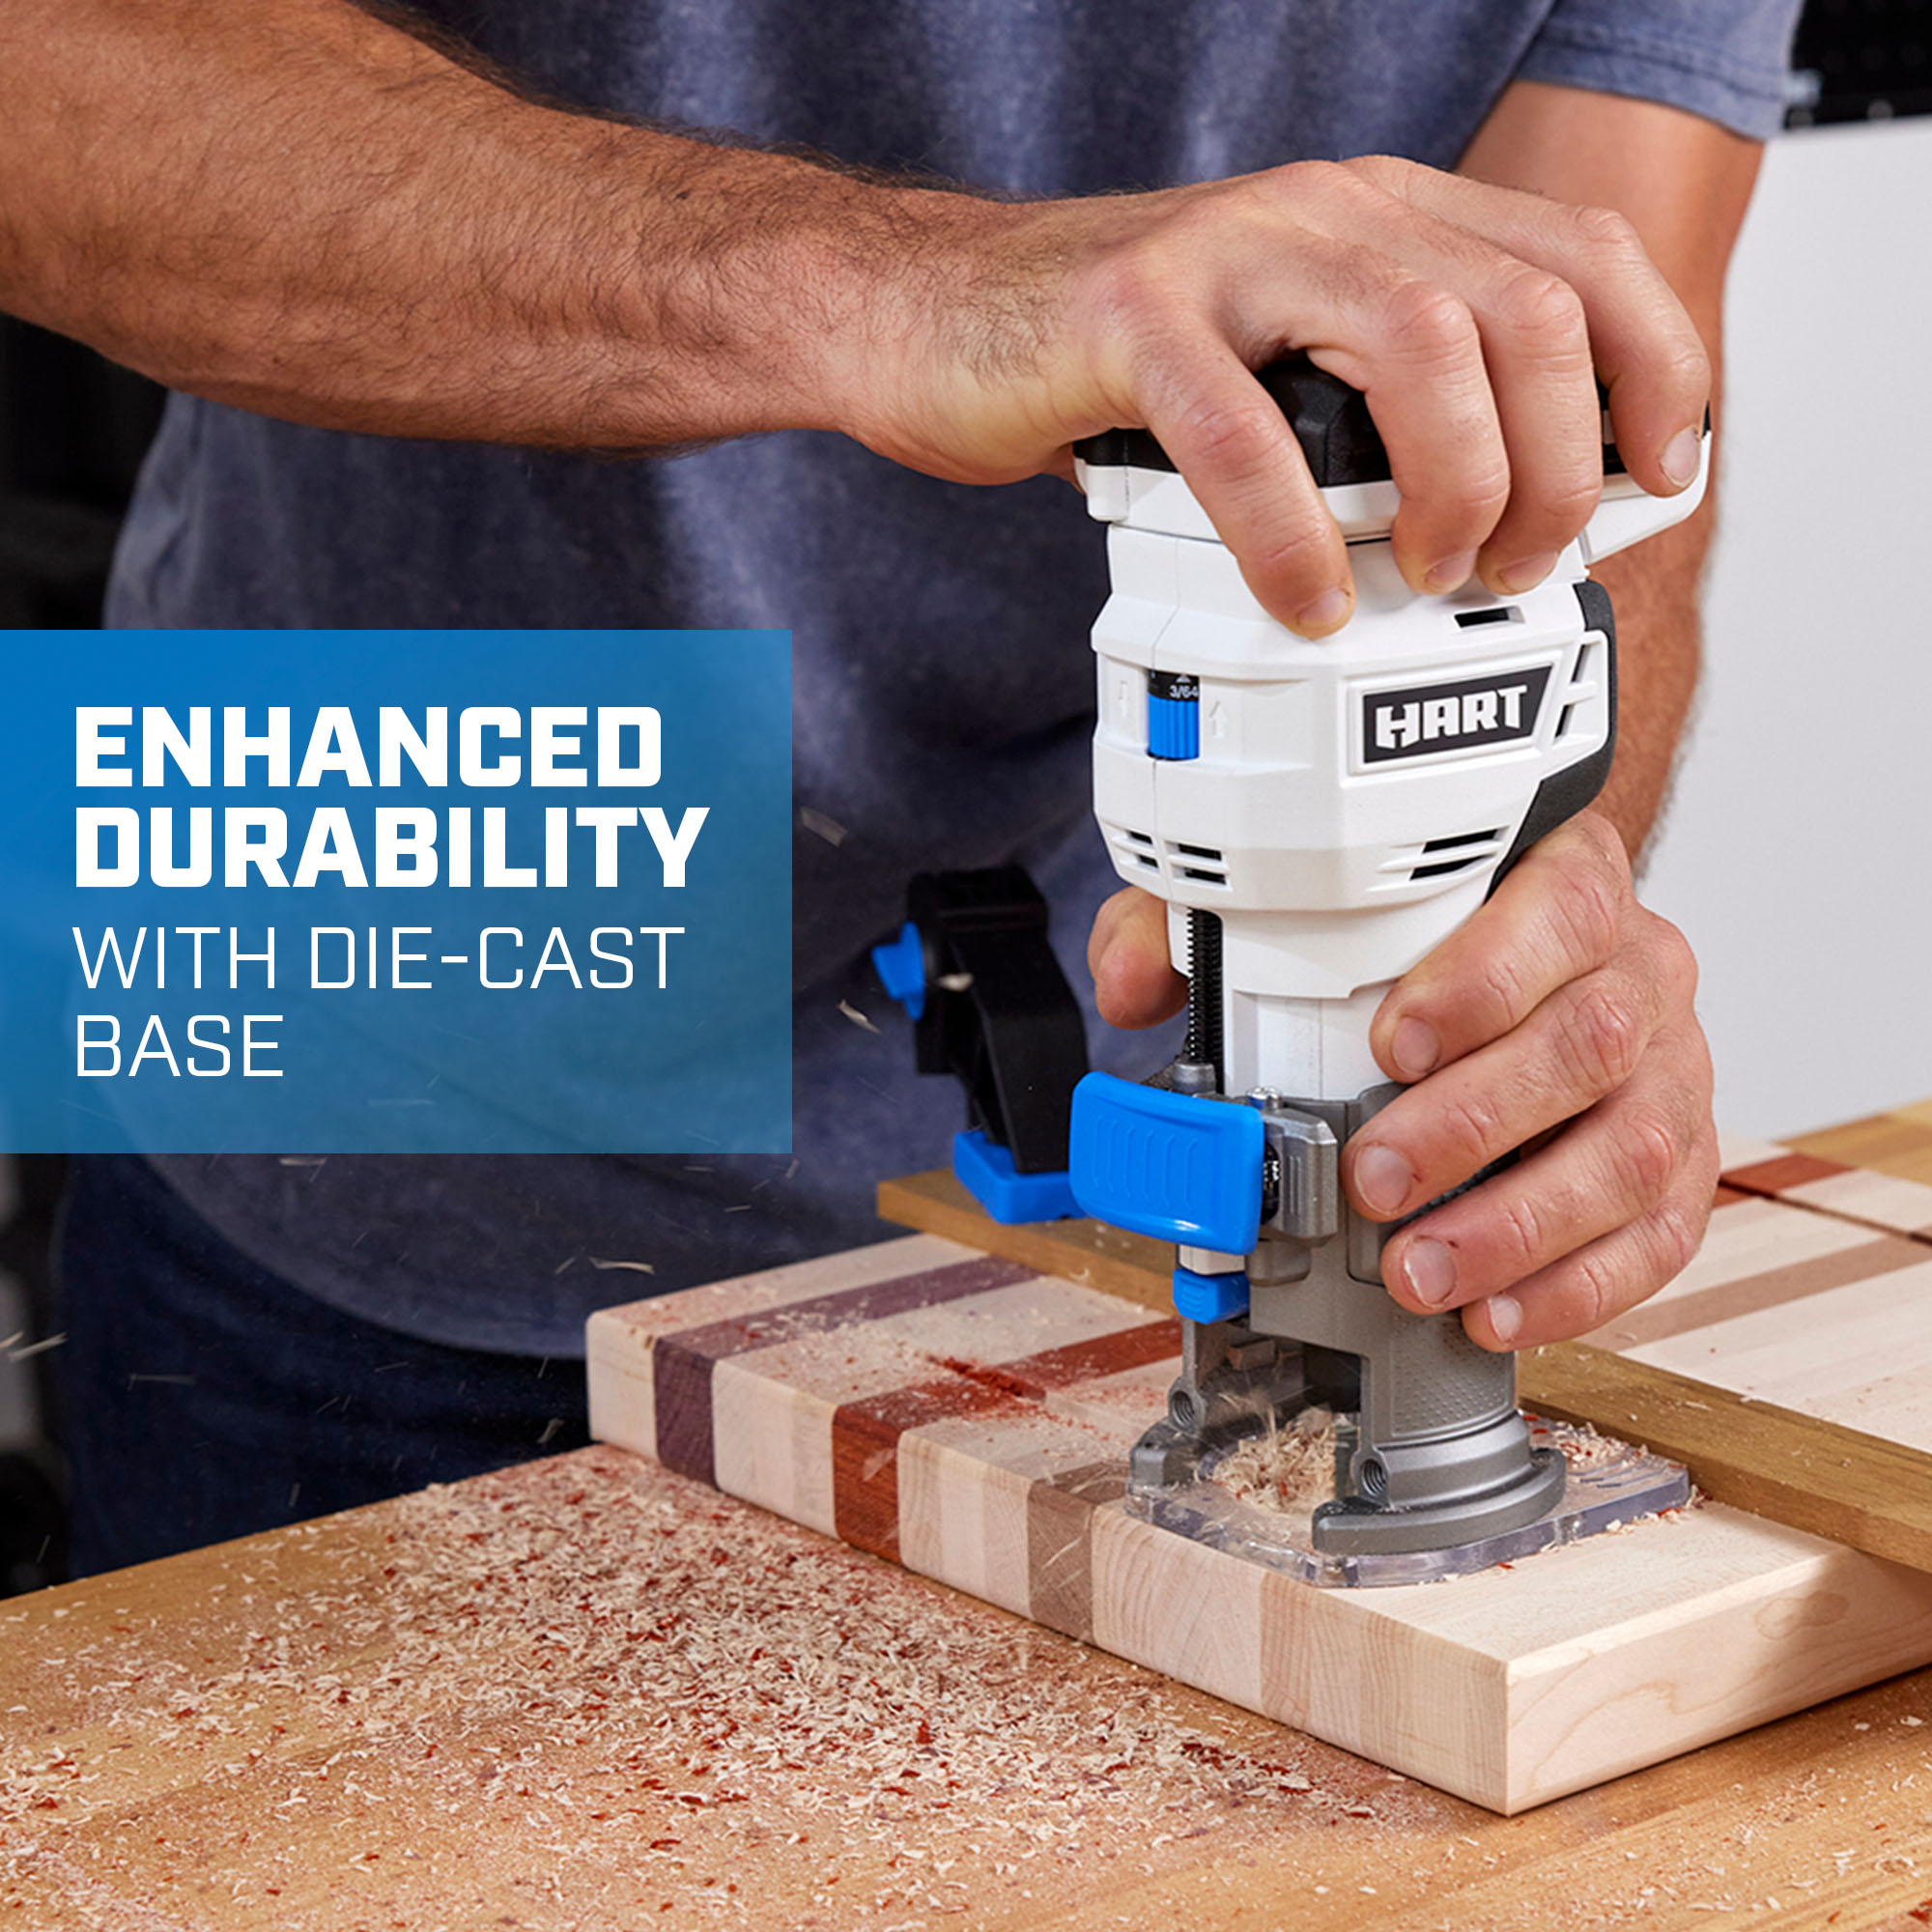 HART 20-Volt Cordless Trim Router Kit for Cutting, Shaping and Trimming, (1) 2.0Ah Lithium-Ion Battery - image 3 of 14